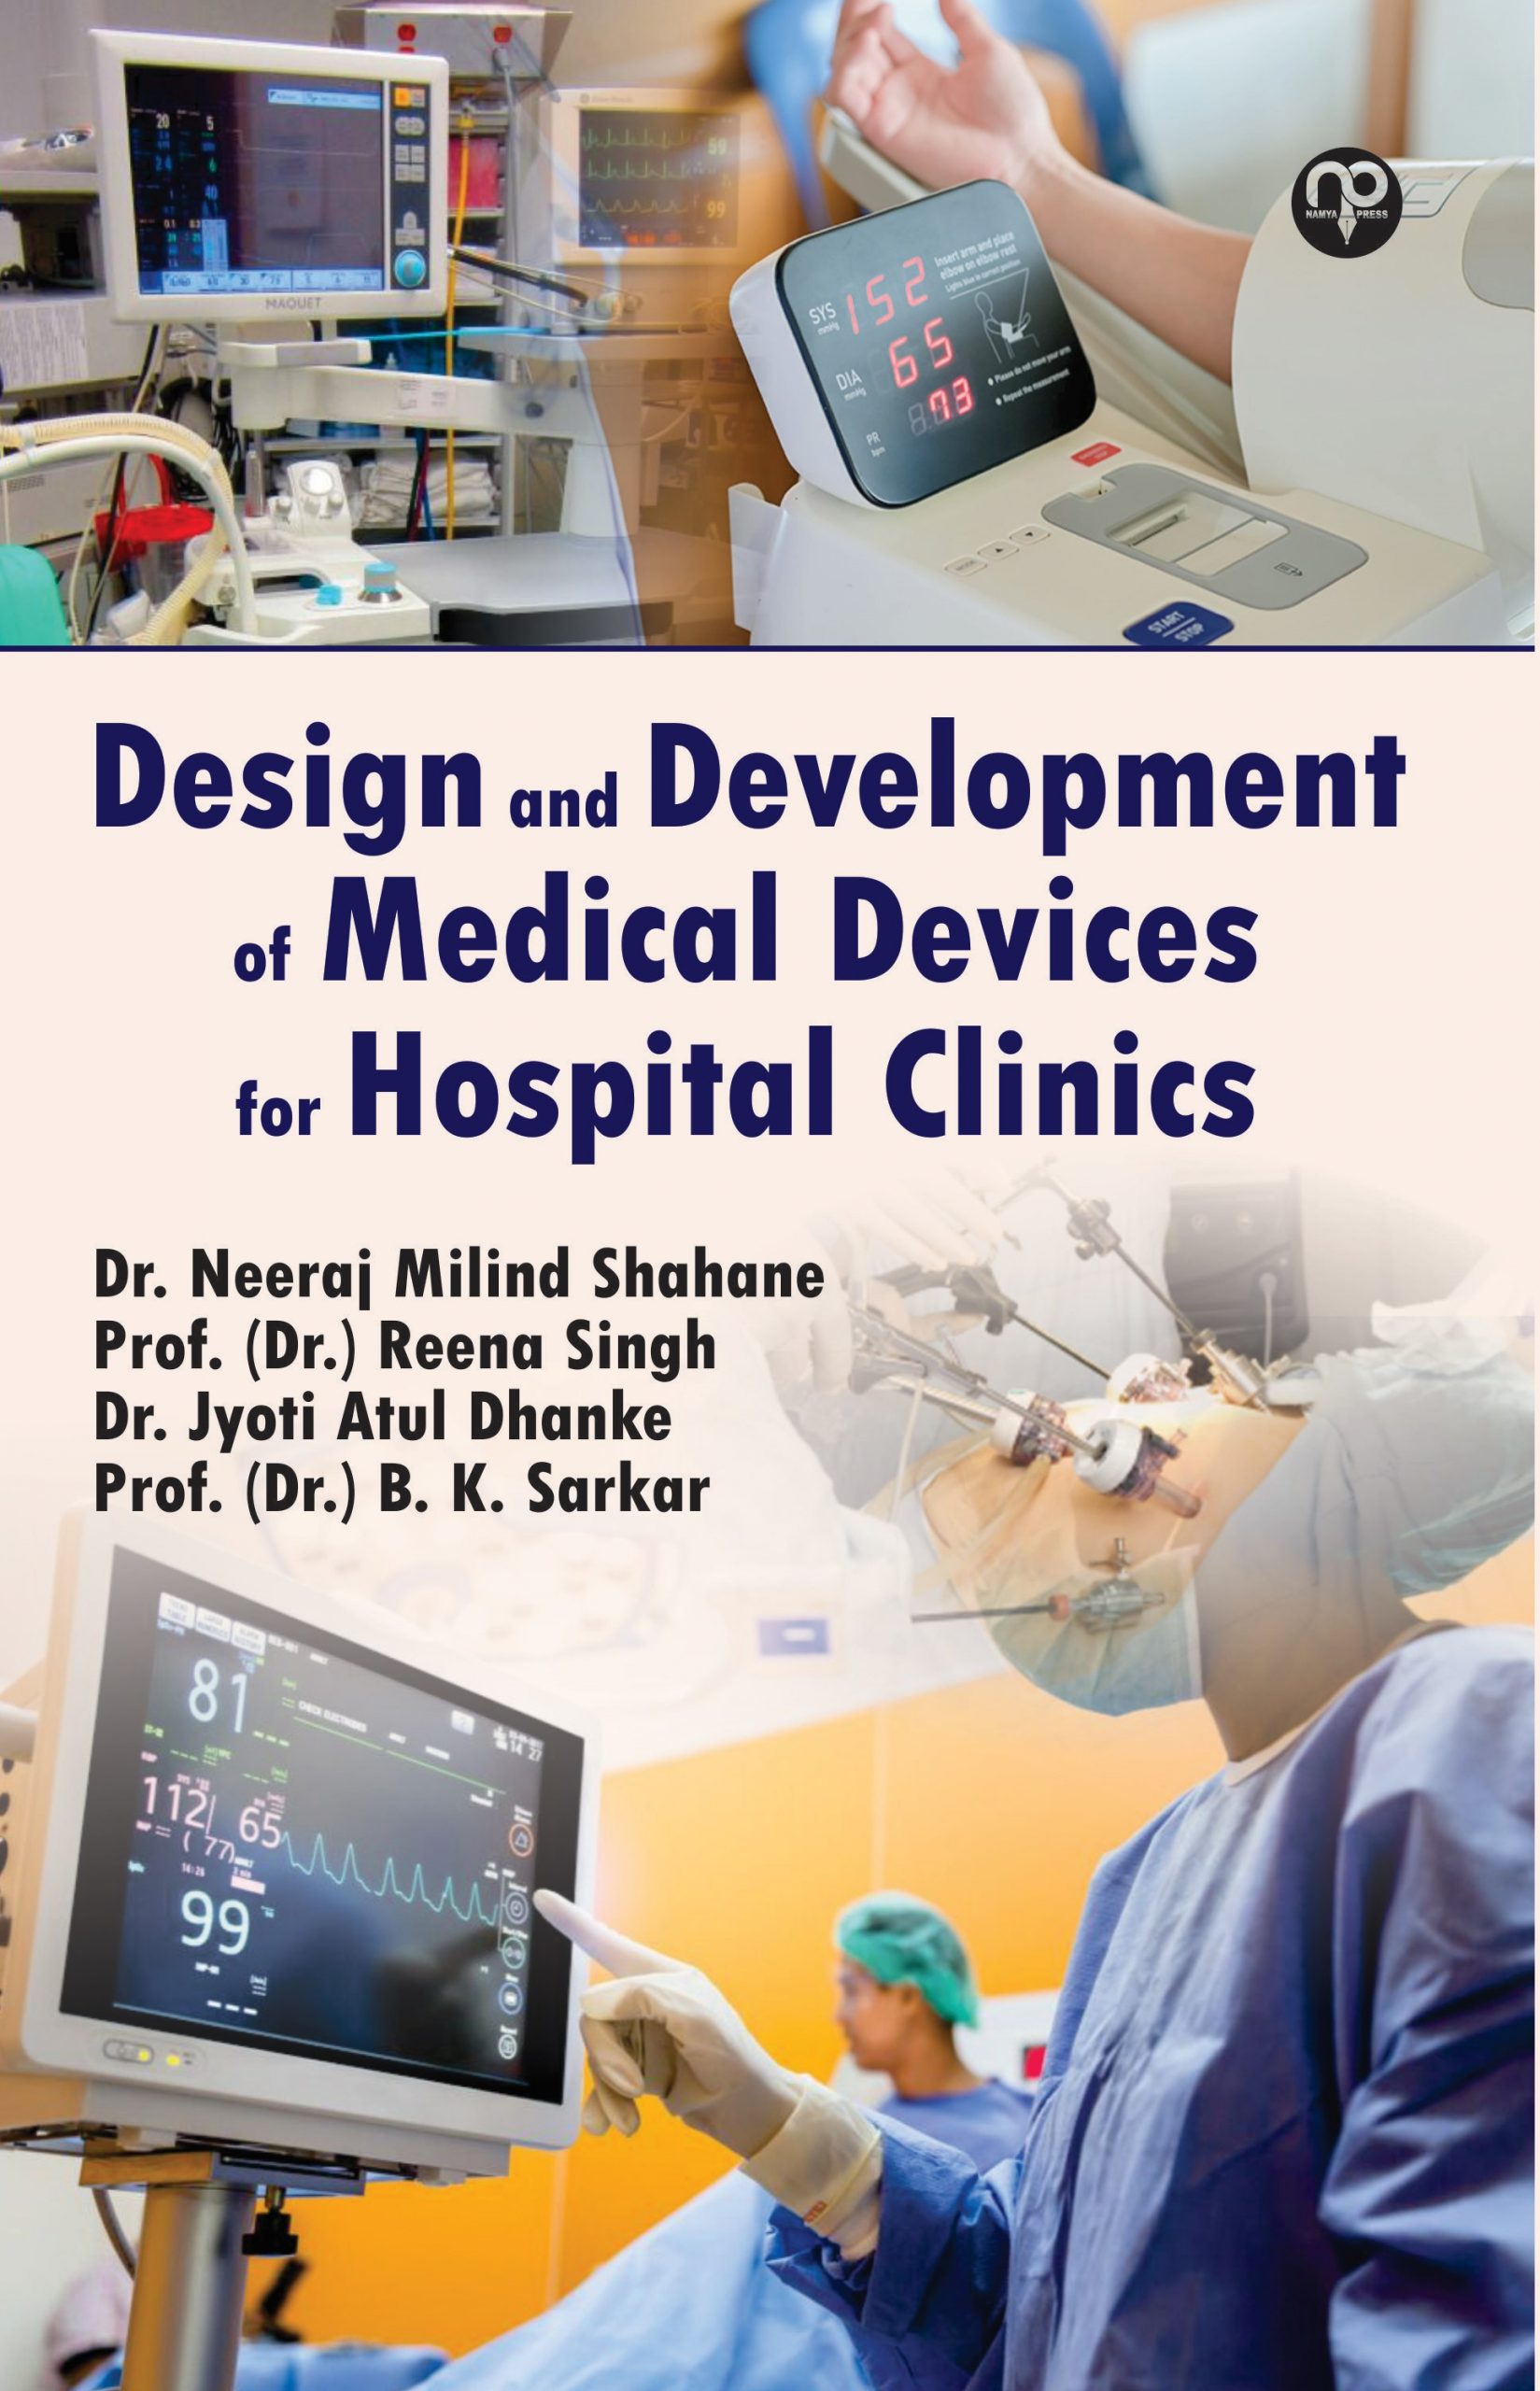 Design-and-Development-of-Medical-Devices-for-Hospital-Clinics-scaled